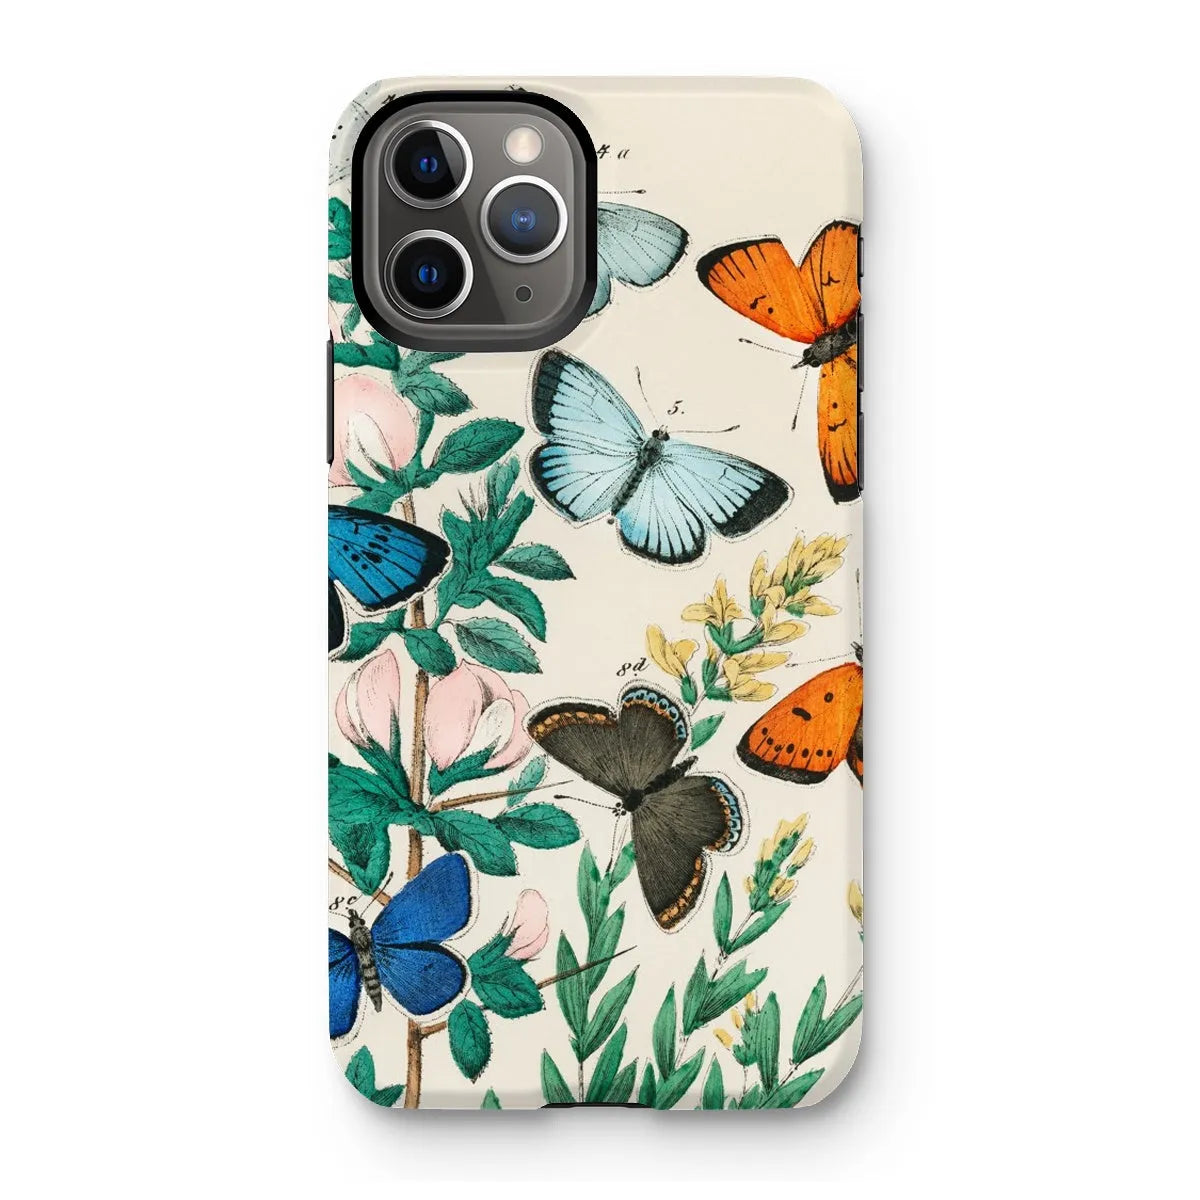 Another Butterfly Aesthetic Art Phone Case - William Forsell Kirby - Iphone 11 Pro / Matte - Mobile Phone Cases